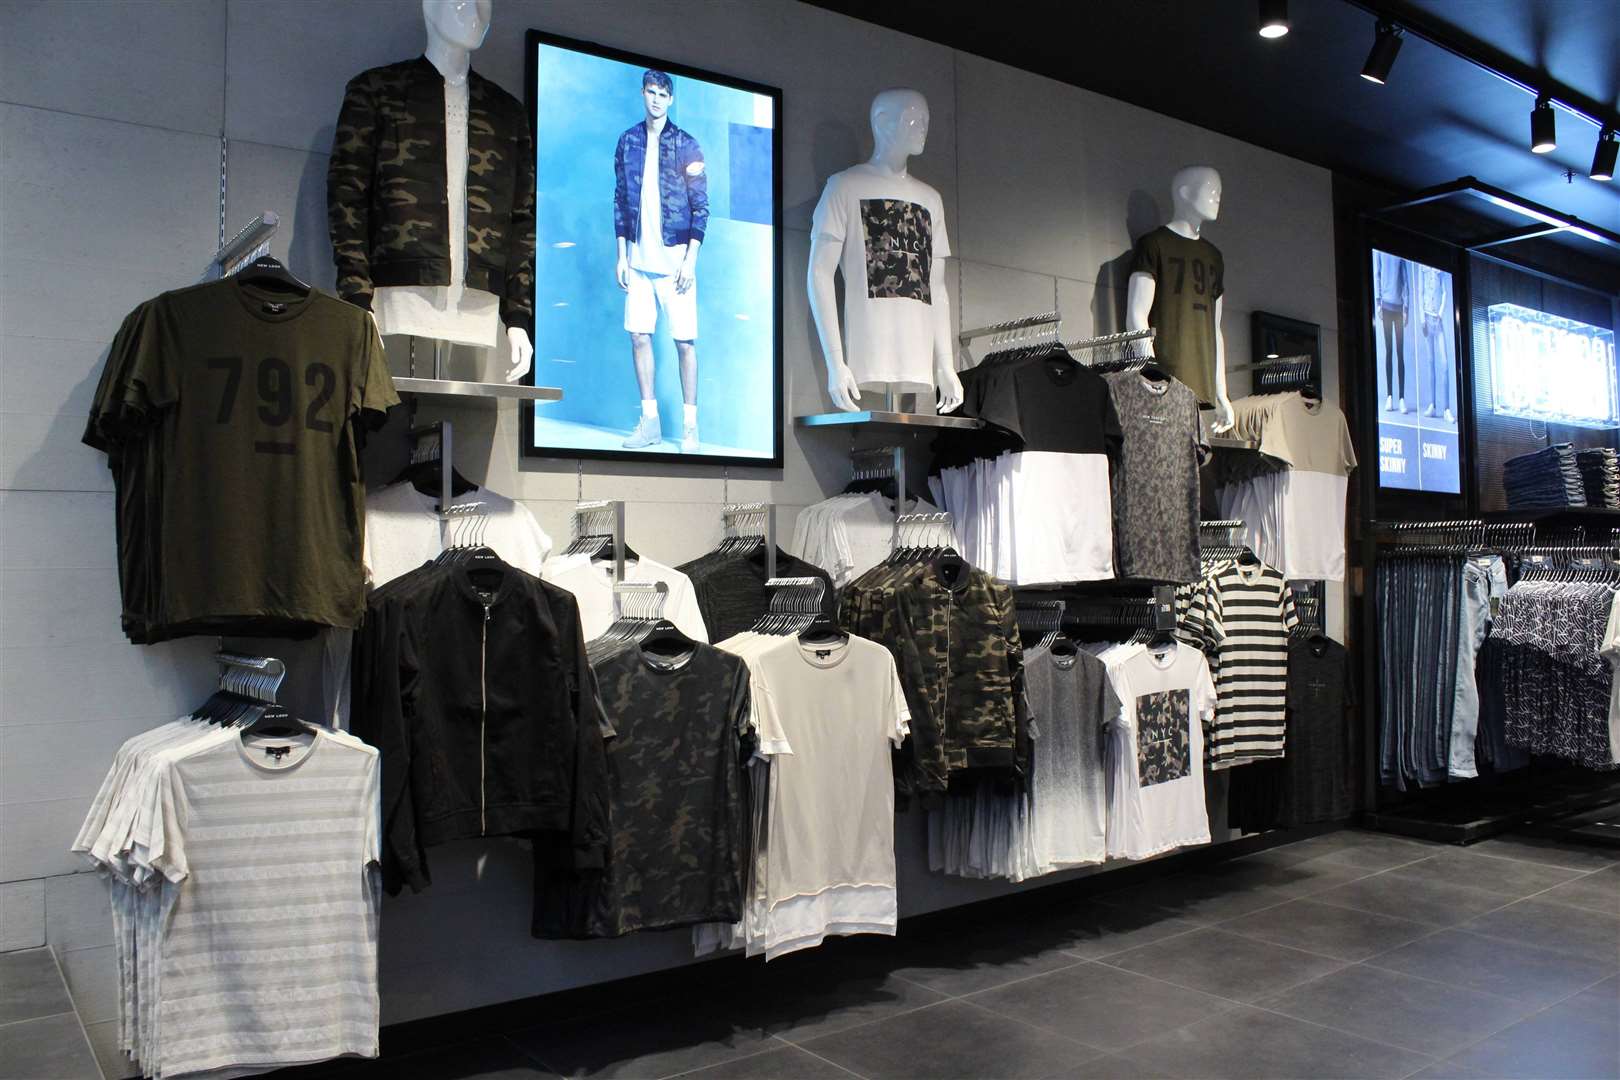 New Look Men has opened a store in Bluewater